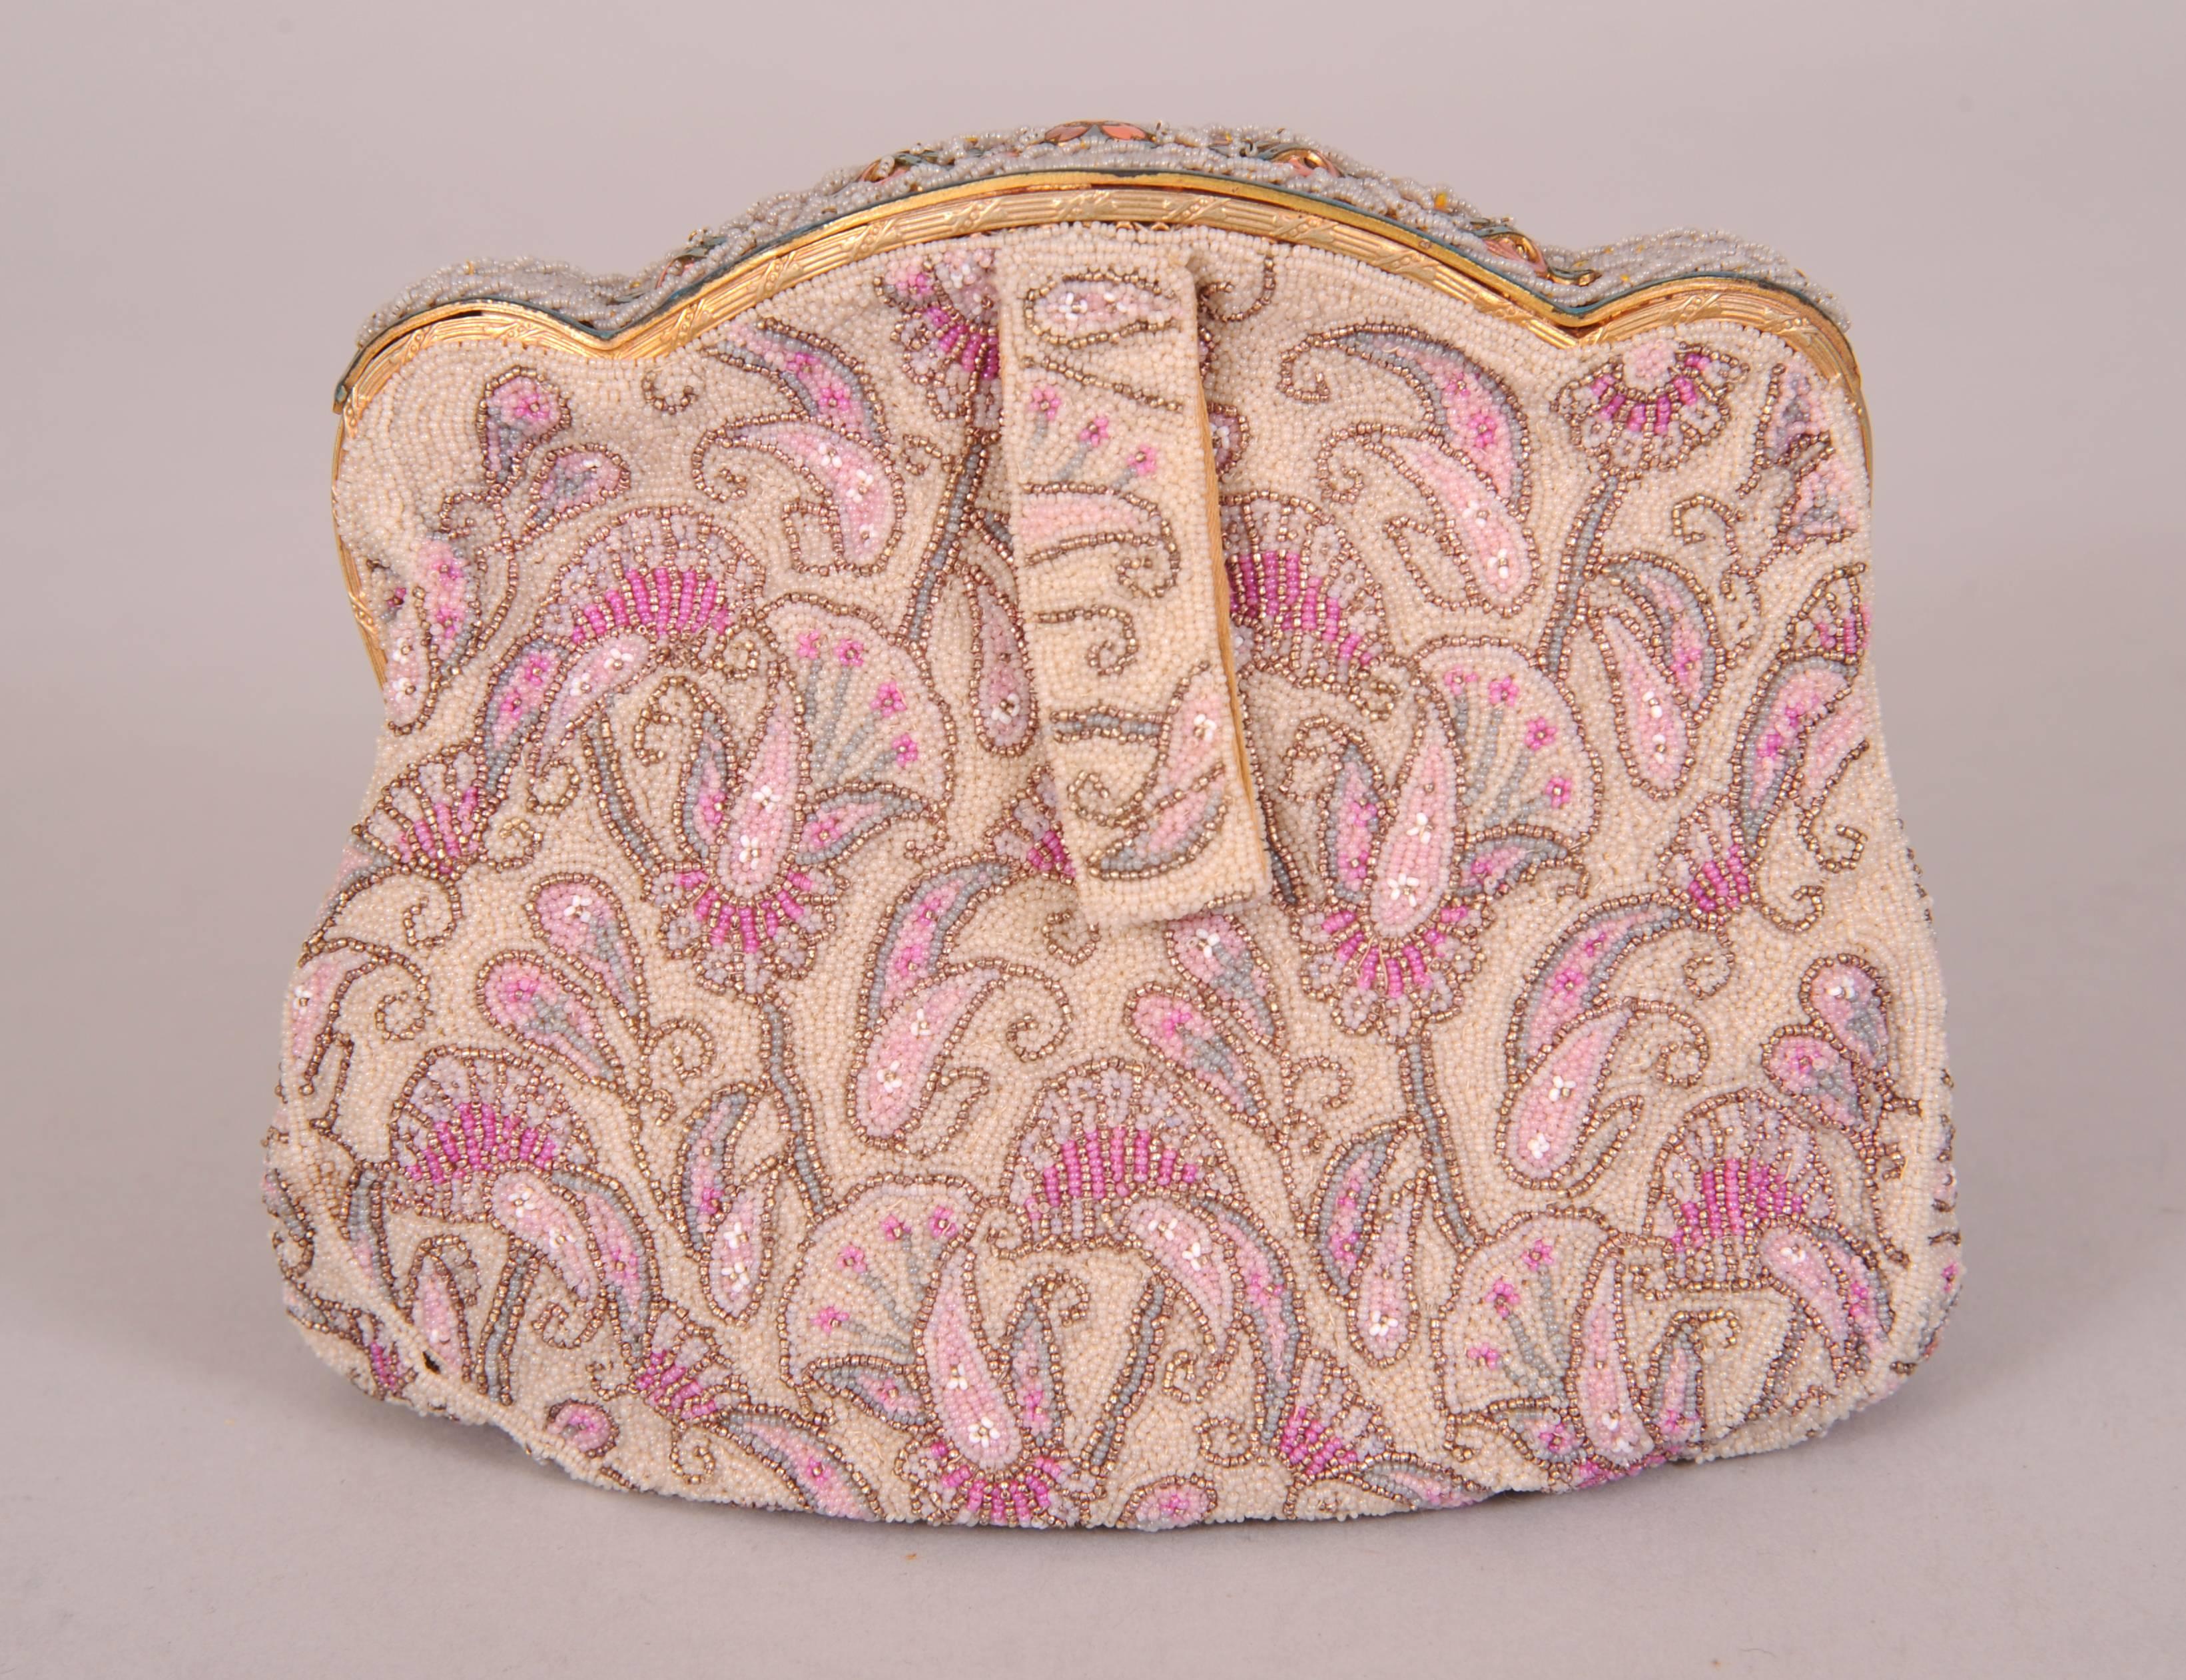 This beautiful beaded French evening bag has a pastel pink floral design, edged in silver beads , on an oyster colored beaded background. The caviar beads are very small and delicate, a size no longer used today.  The bag has a beaded frame with an